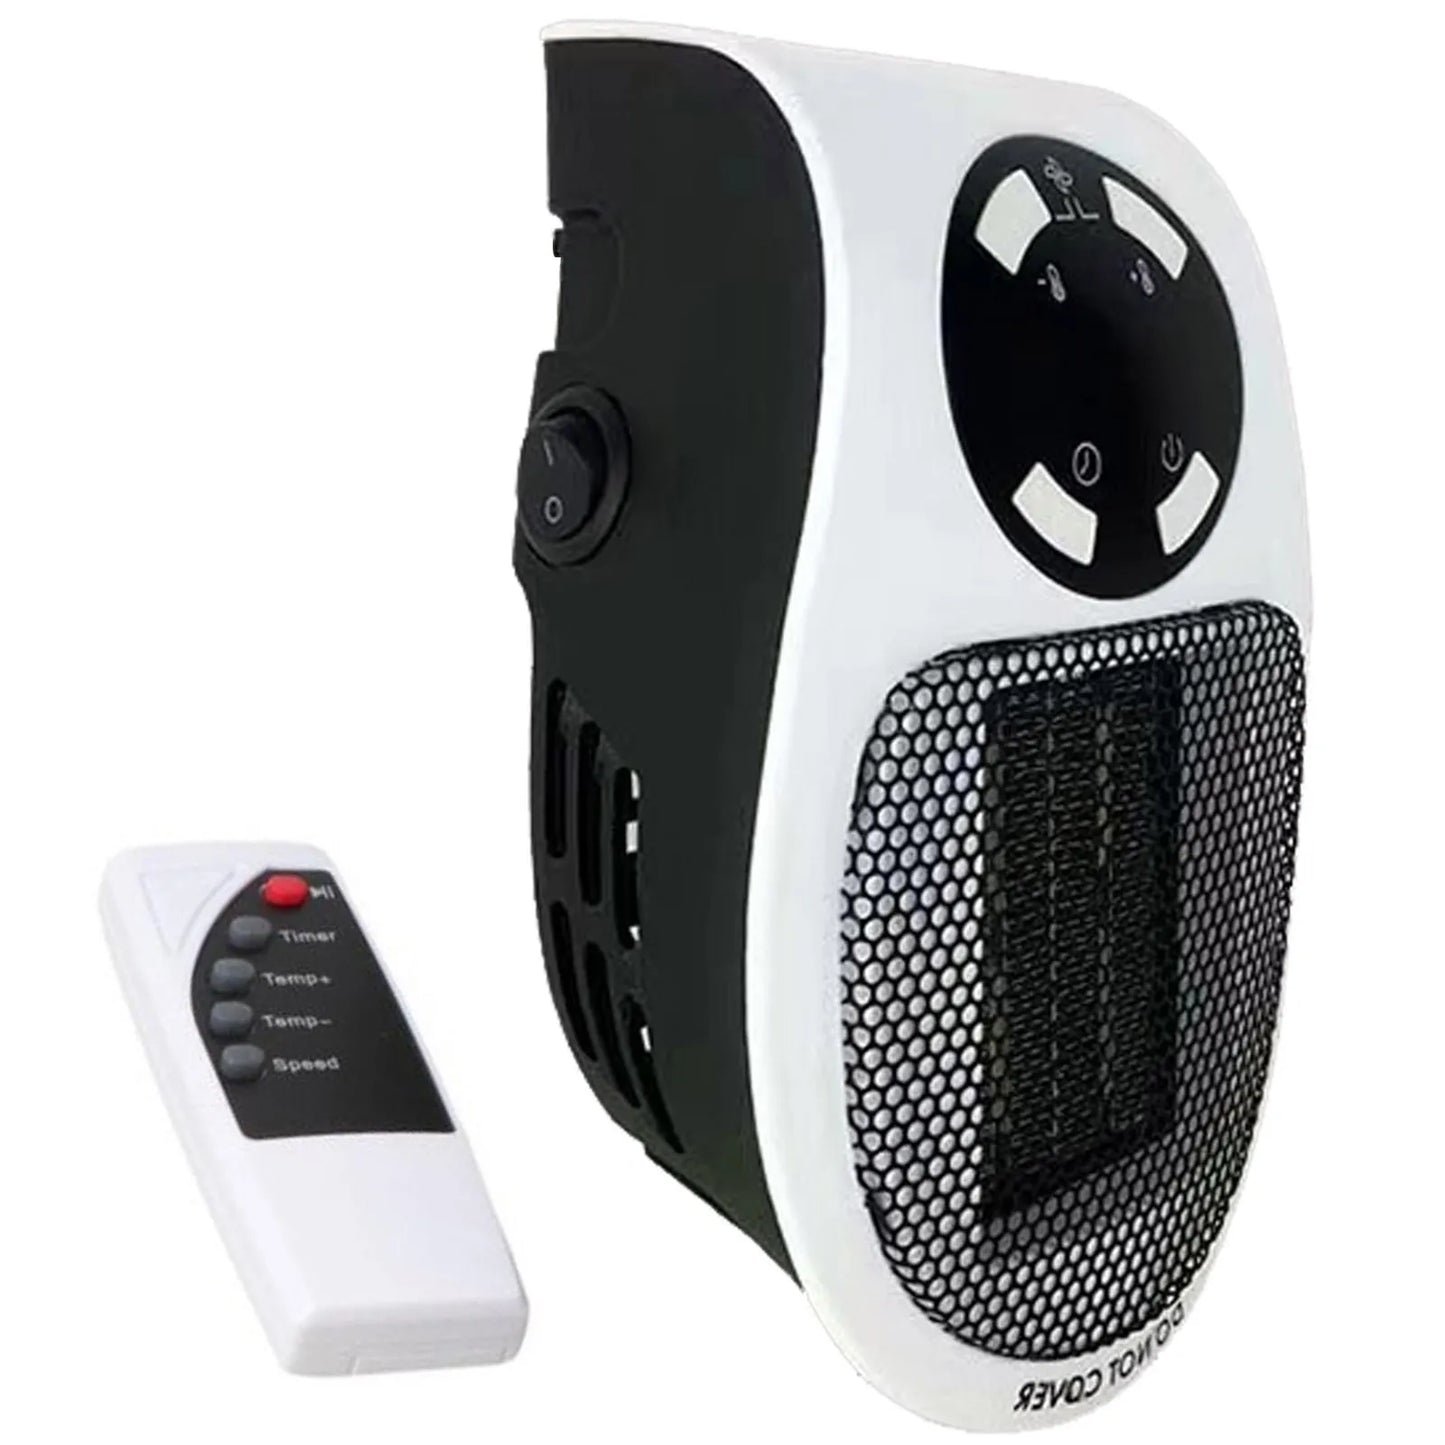 500W Fan Heater Electric Heater Ceramic Fan Heater 3 Modes Safe Energy Saving Quiet Room Thermostat For Indoor Office Bedroom.